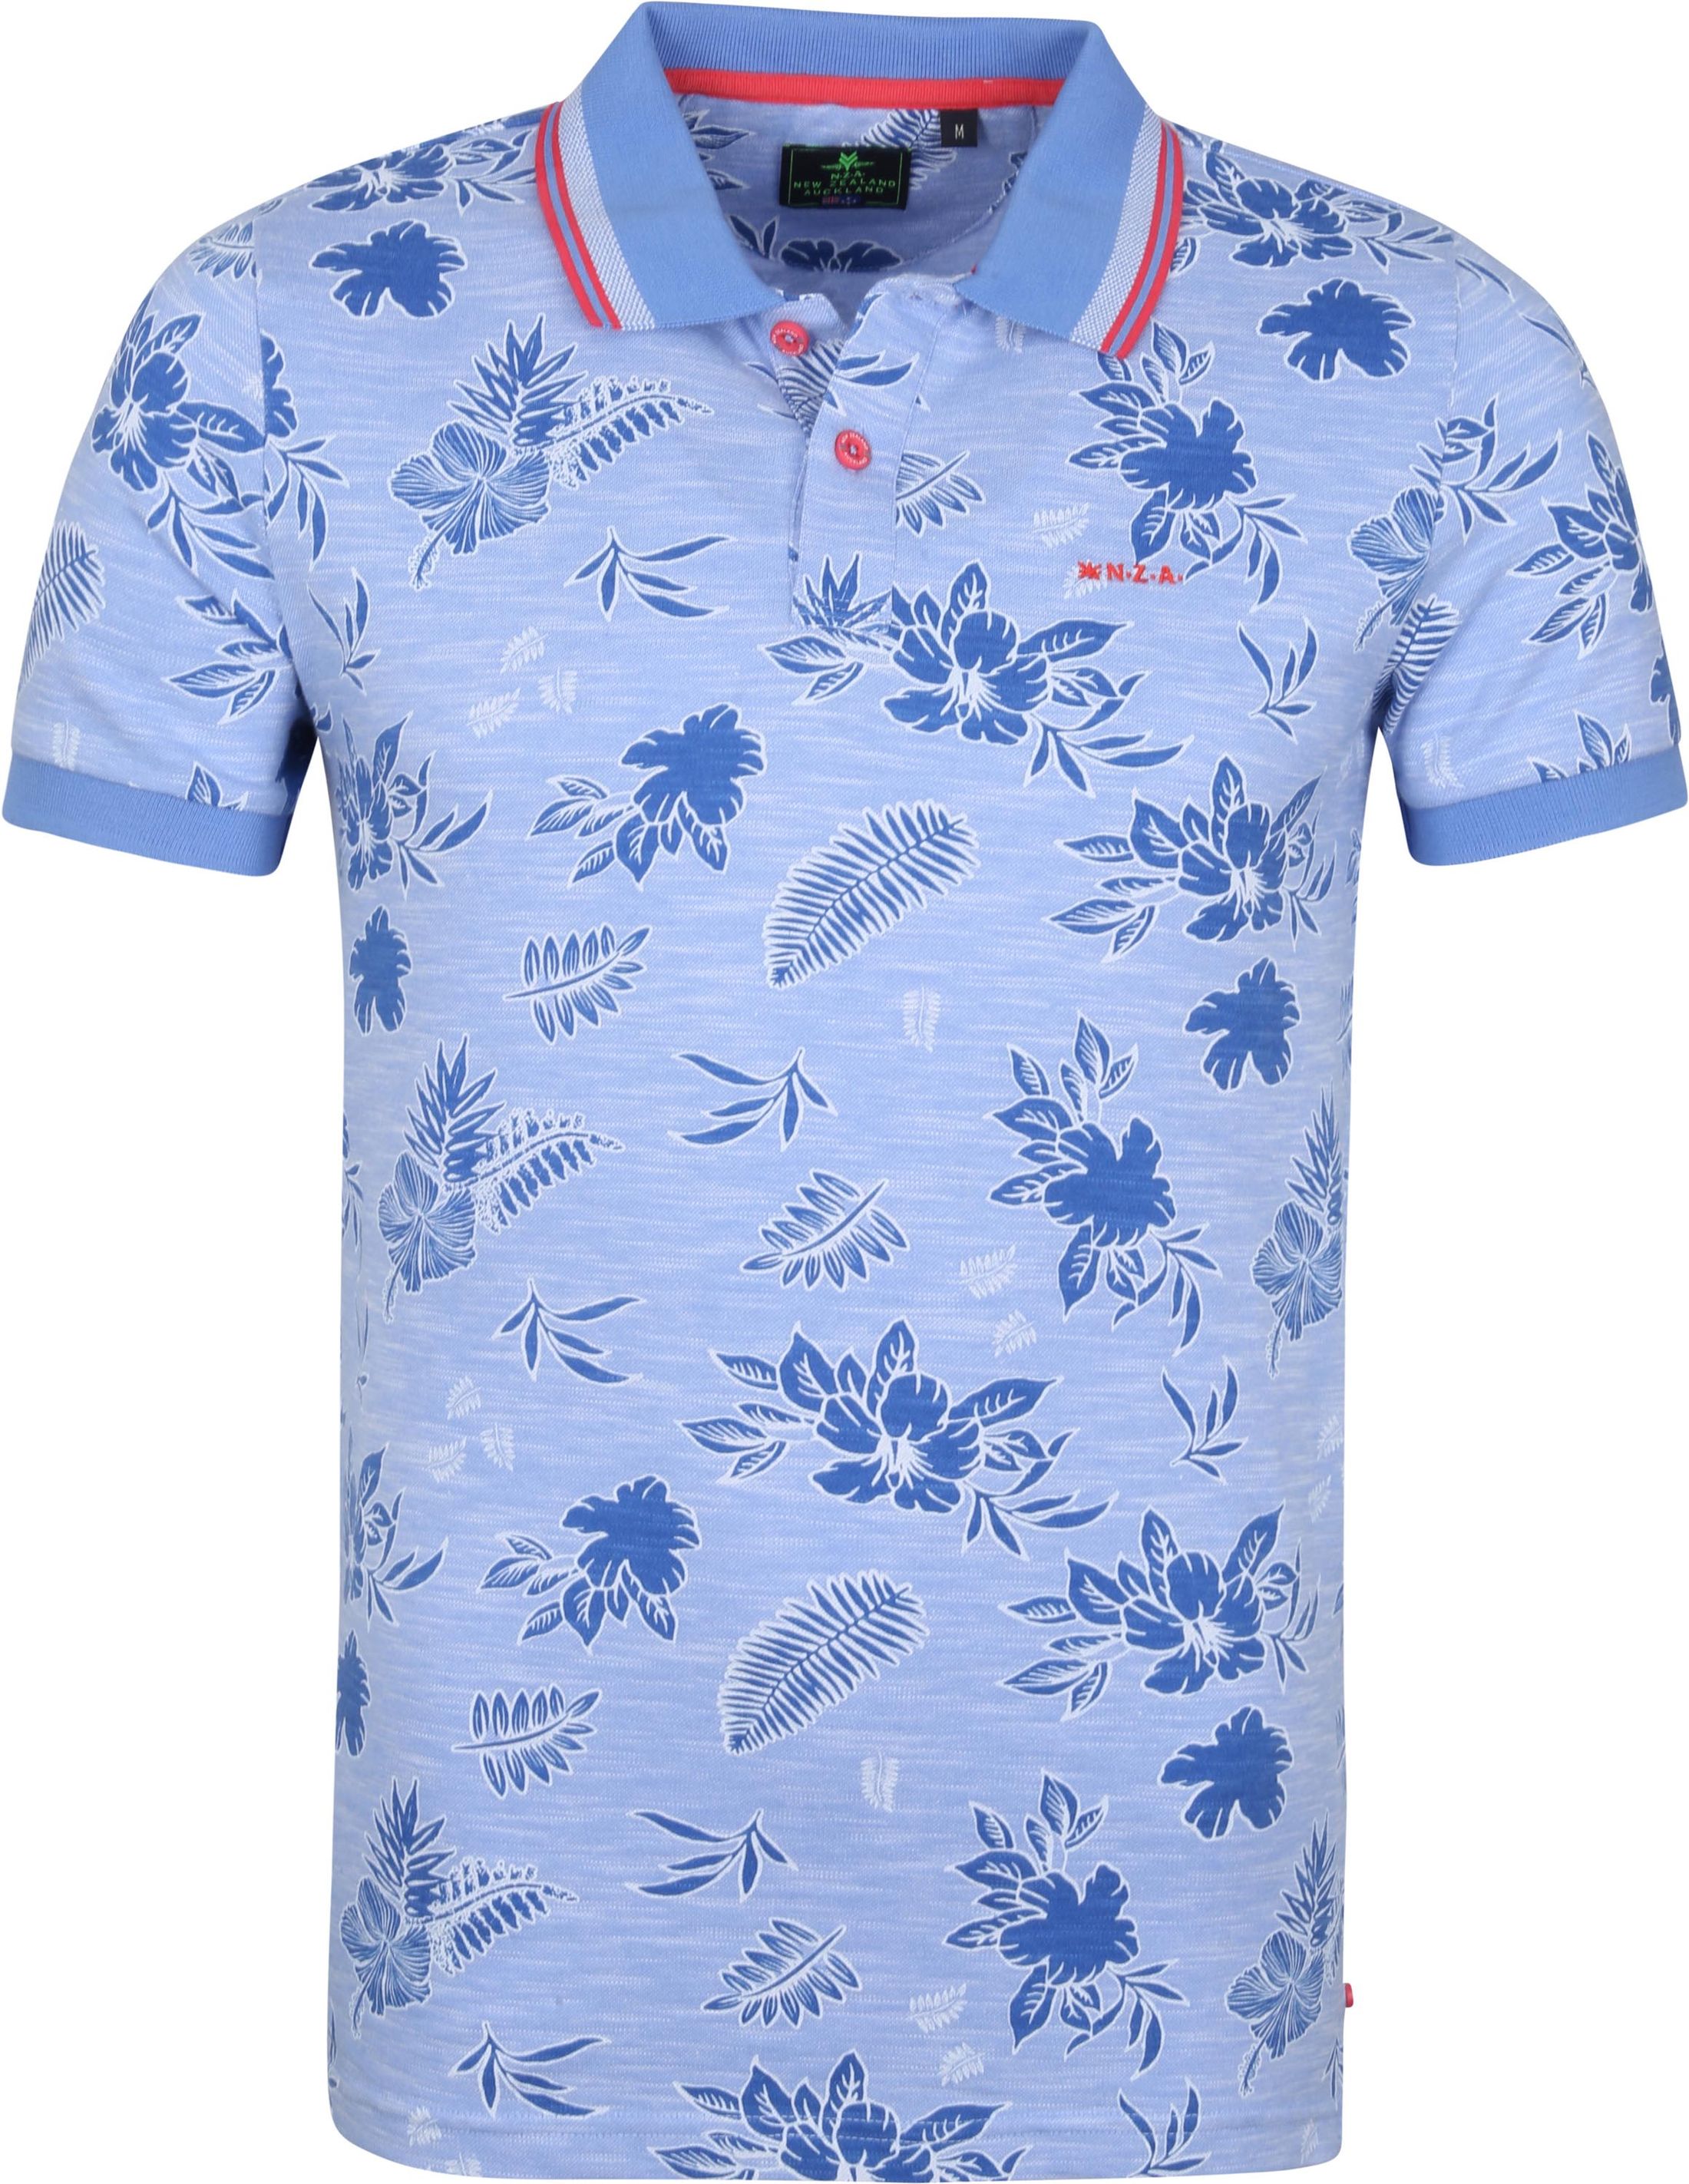 NZA Polo Shirt Normanby Printed Blue size L